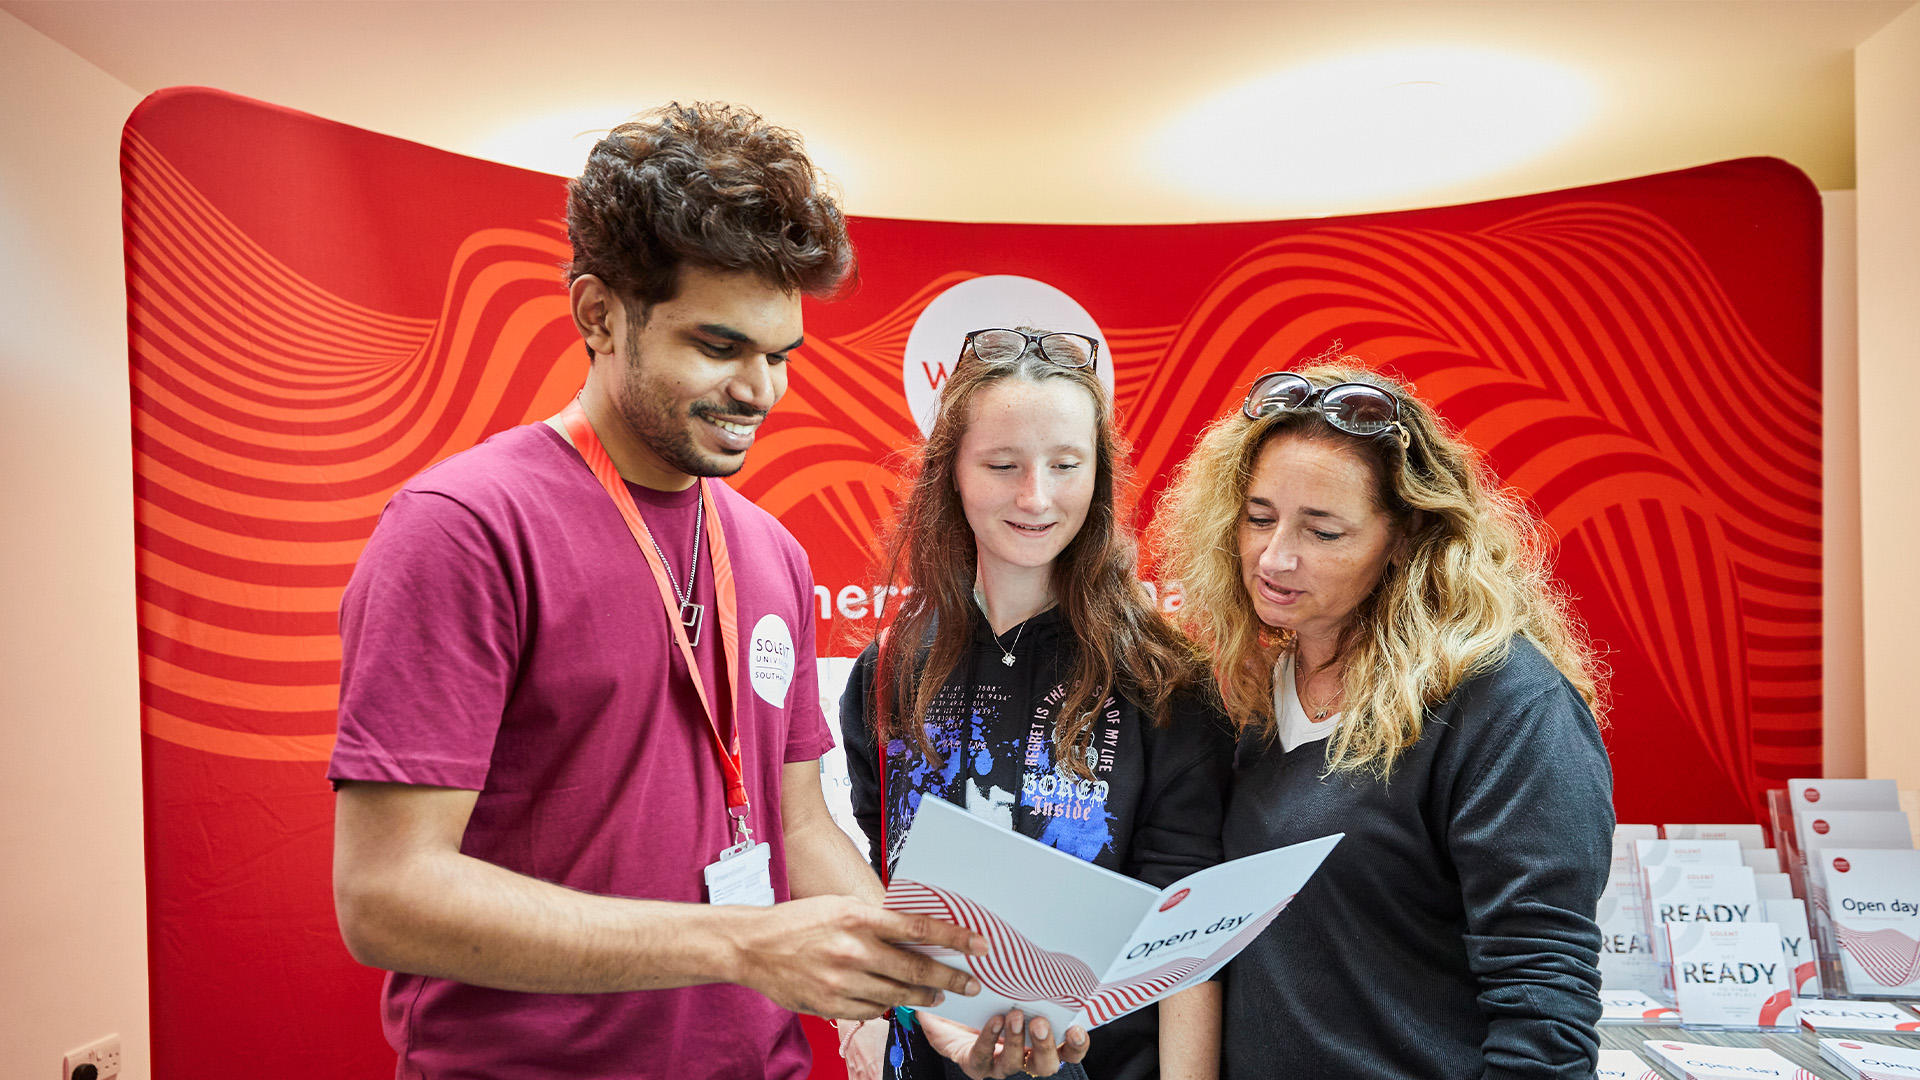 Image shows student ambassador chatting to guests on an open day